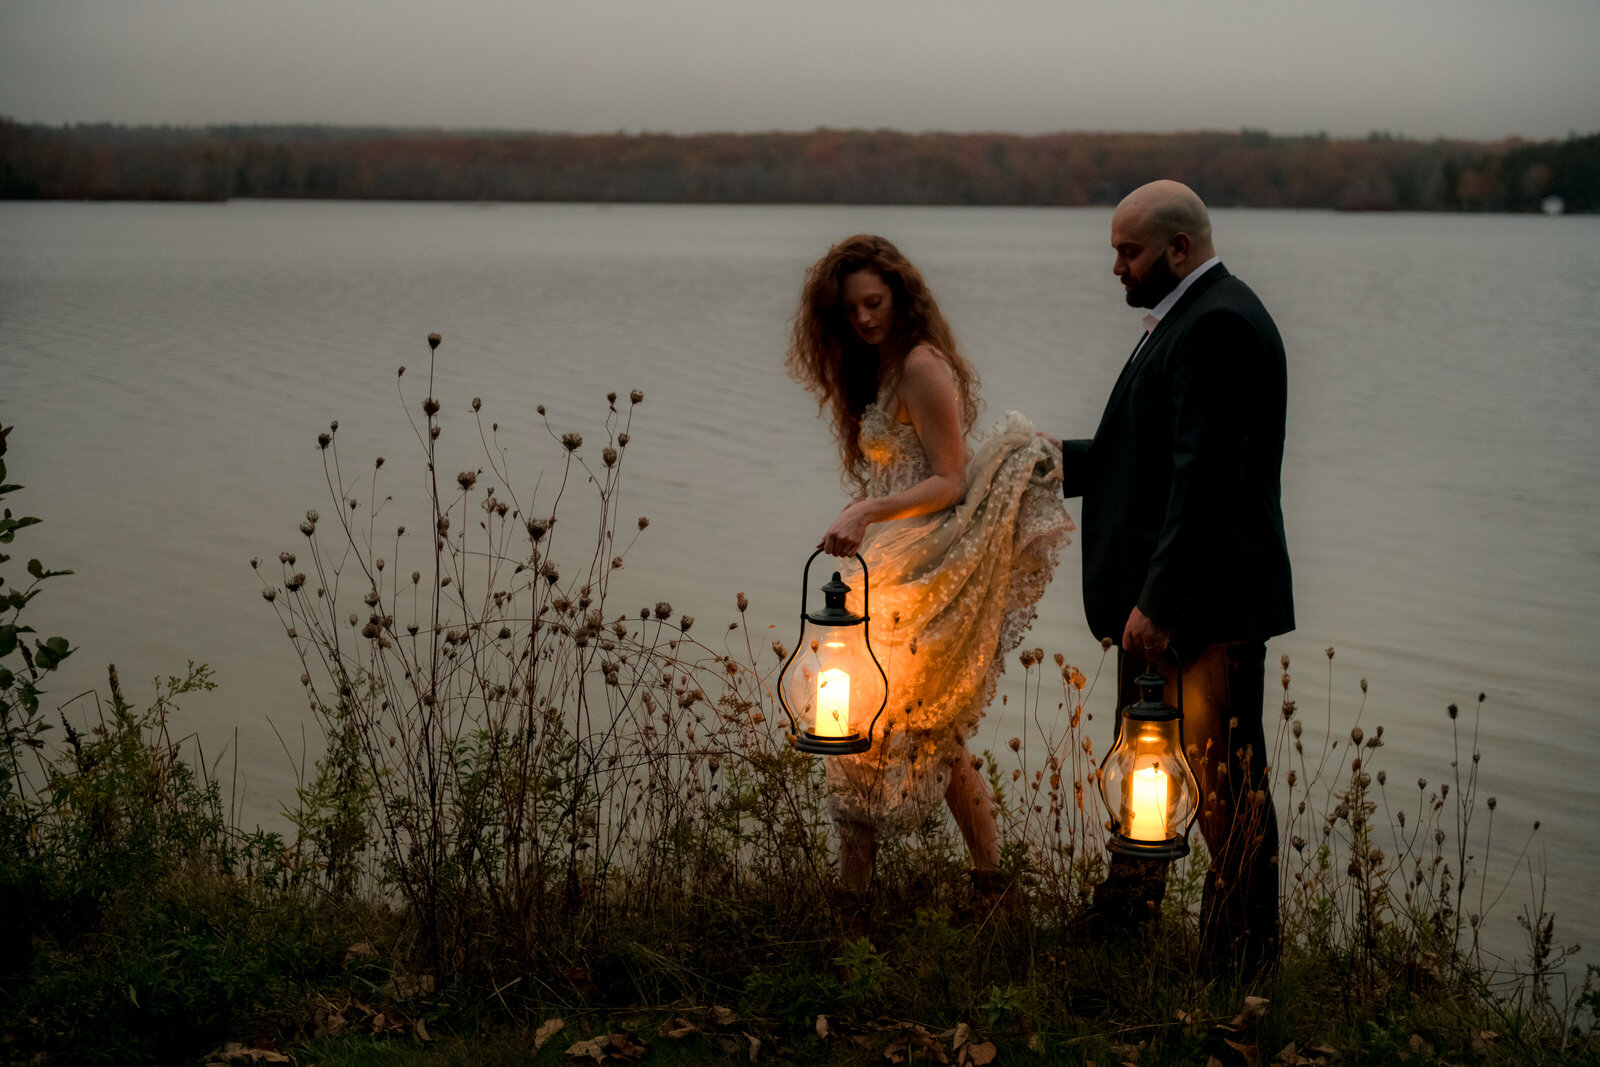 after their elopement the bride and groom escape to a lake at dusk.